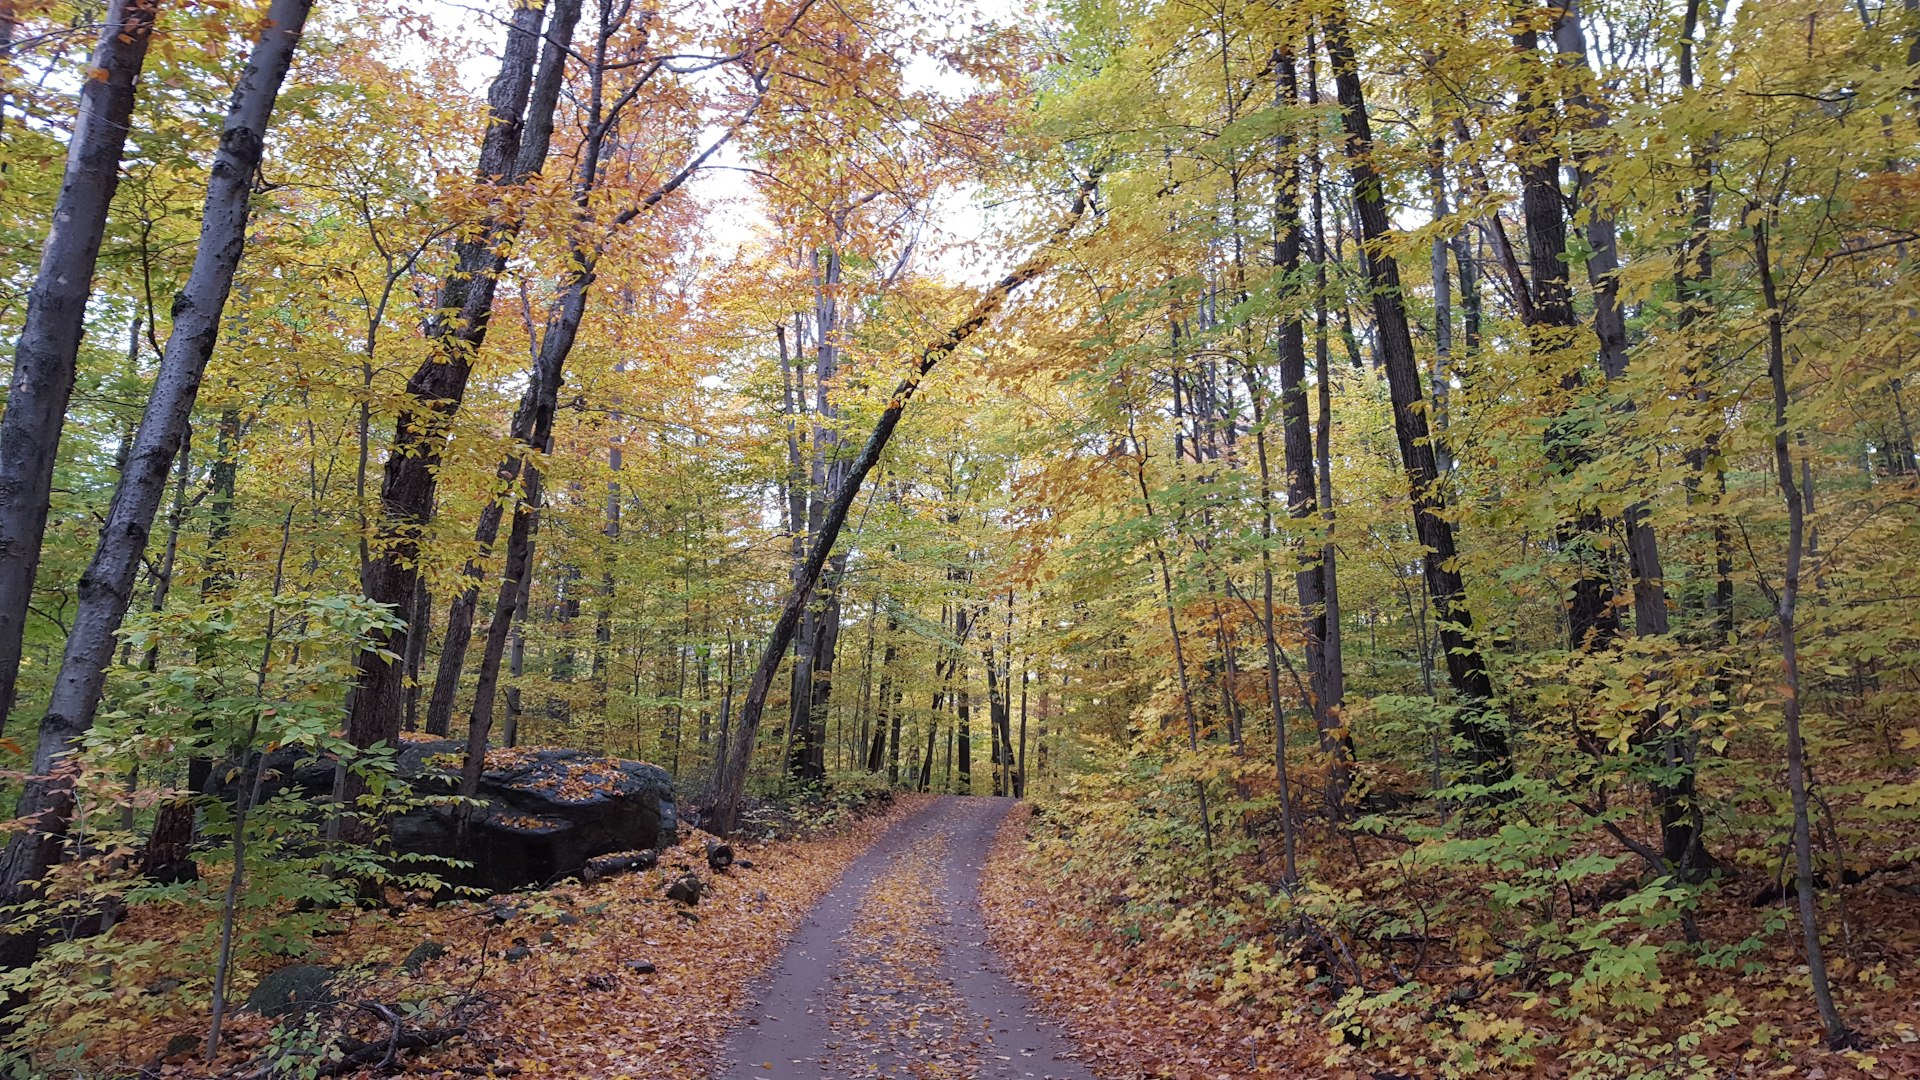 Winding country roads near the Adirondacks let you get lost in the changing fall colors © Ray Bartlett / Lonely Planet